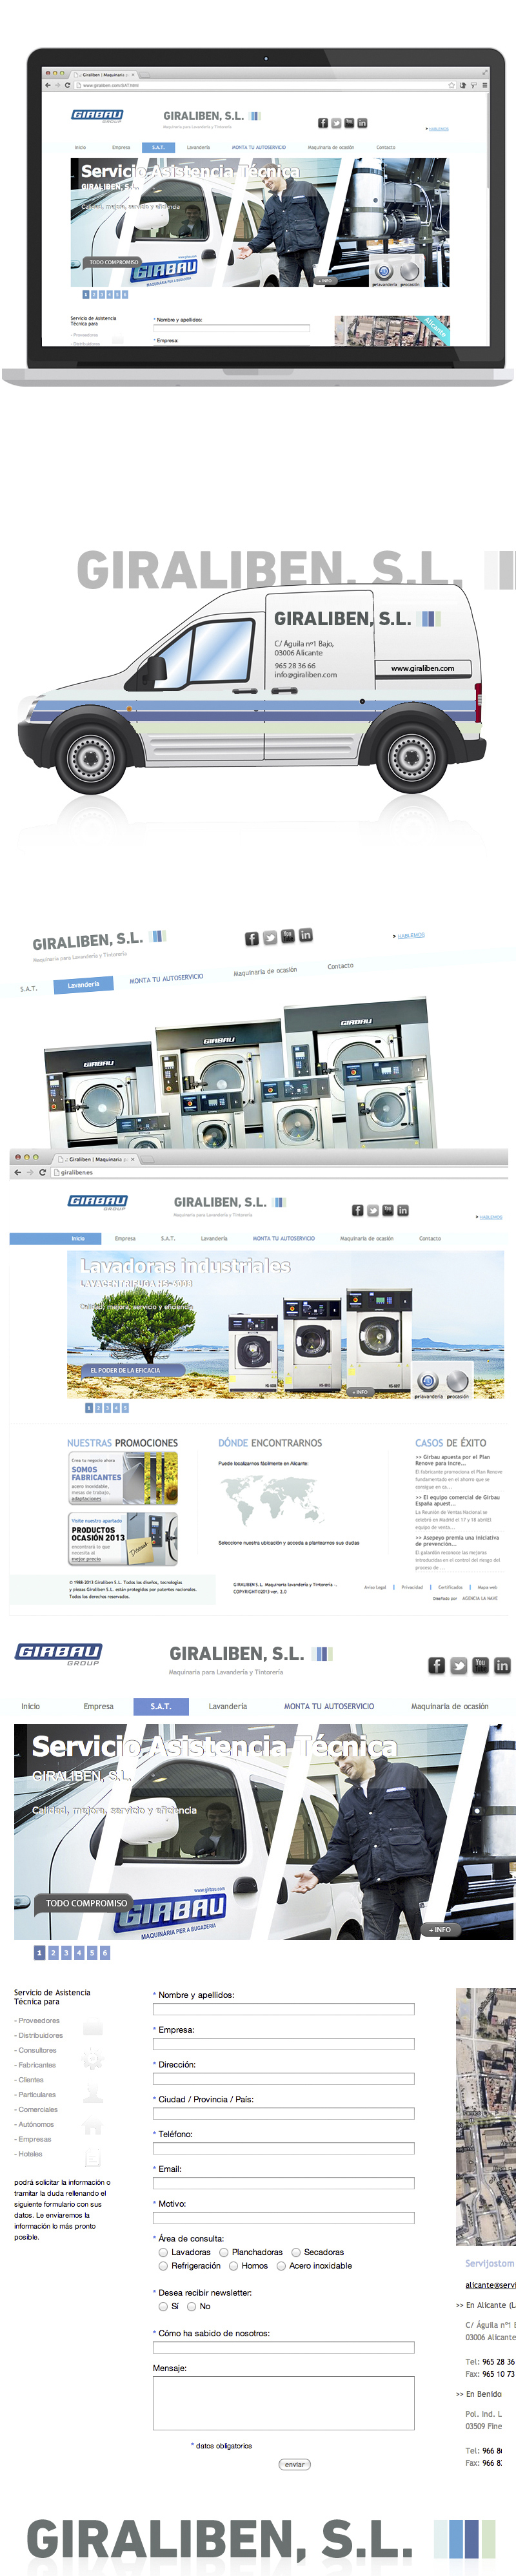 Giraliben Machinery for laundry and dry cleaning pieces image